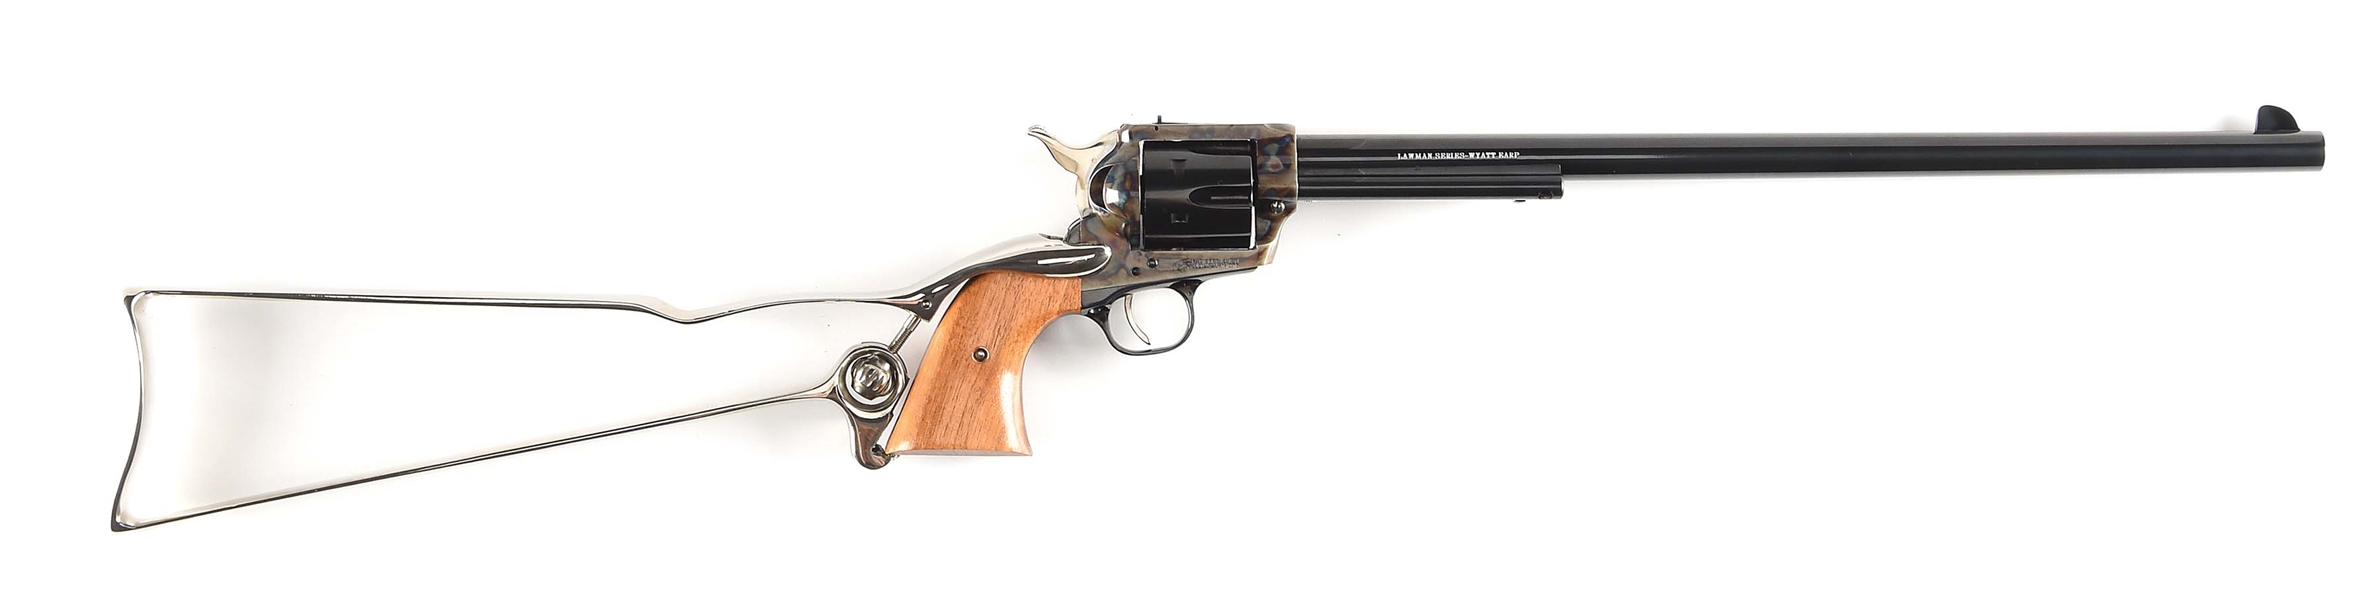 (M) COLT SINGLE ACTION ARMY LAWMAN SERIES - WYATT EARP WITH SHOULDER STOCK.